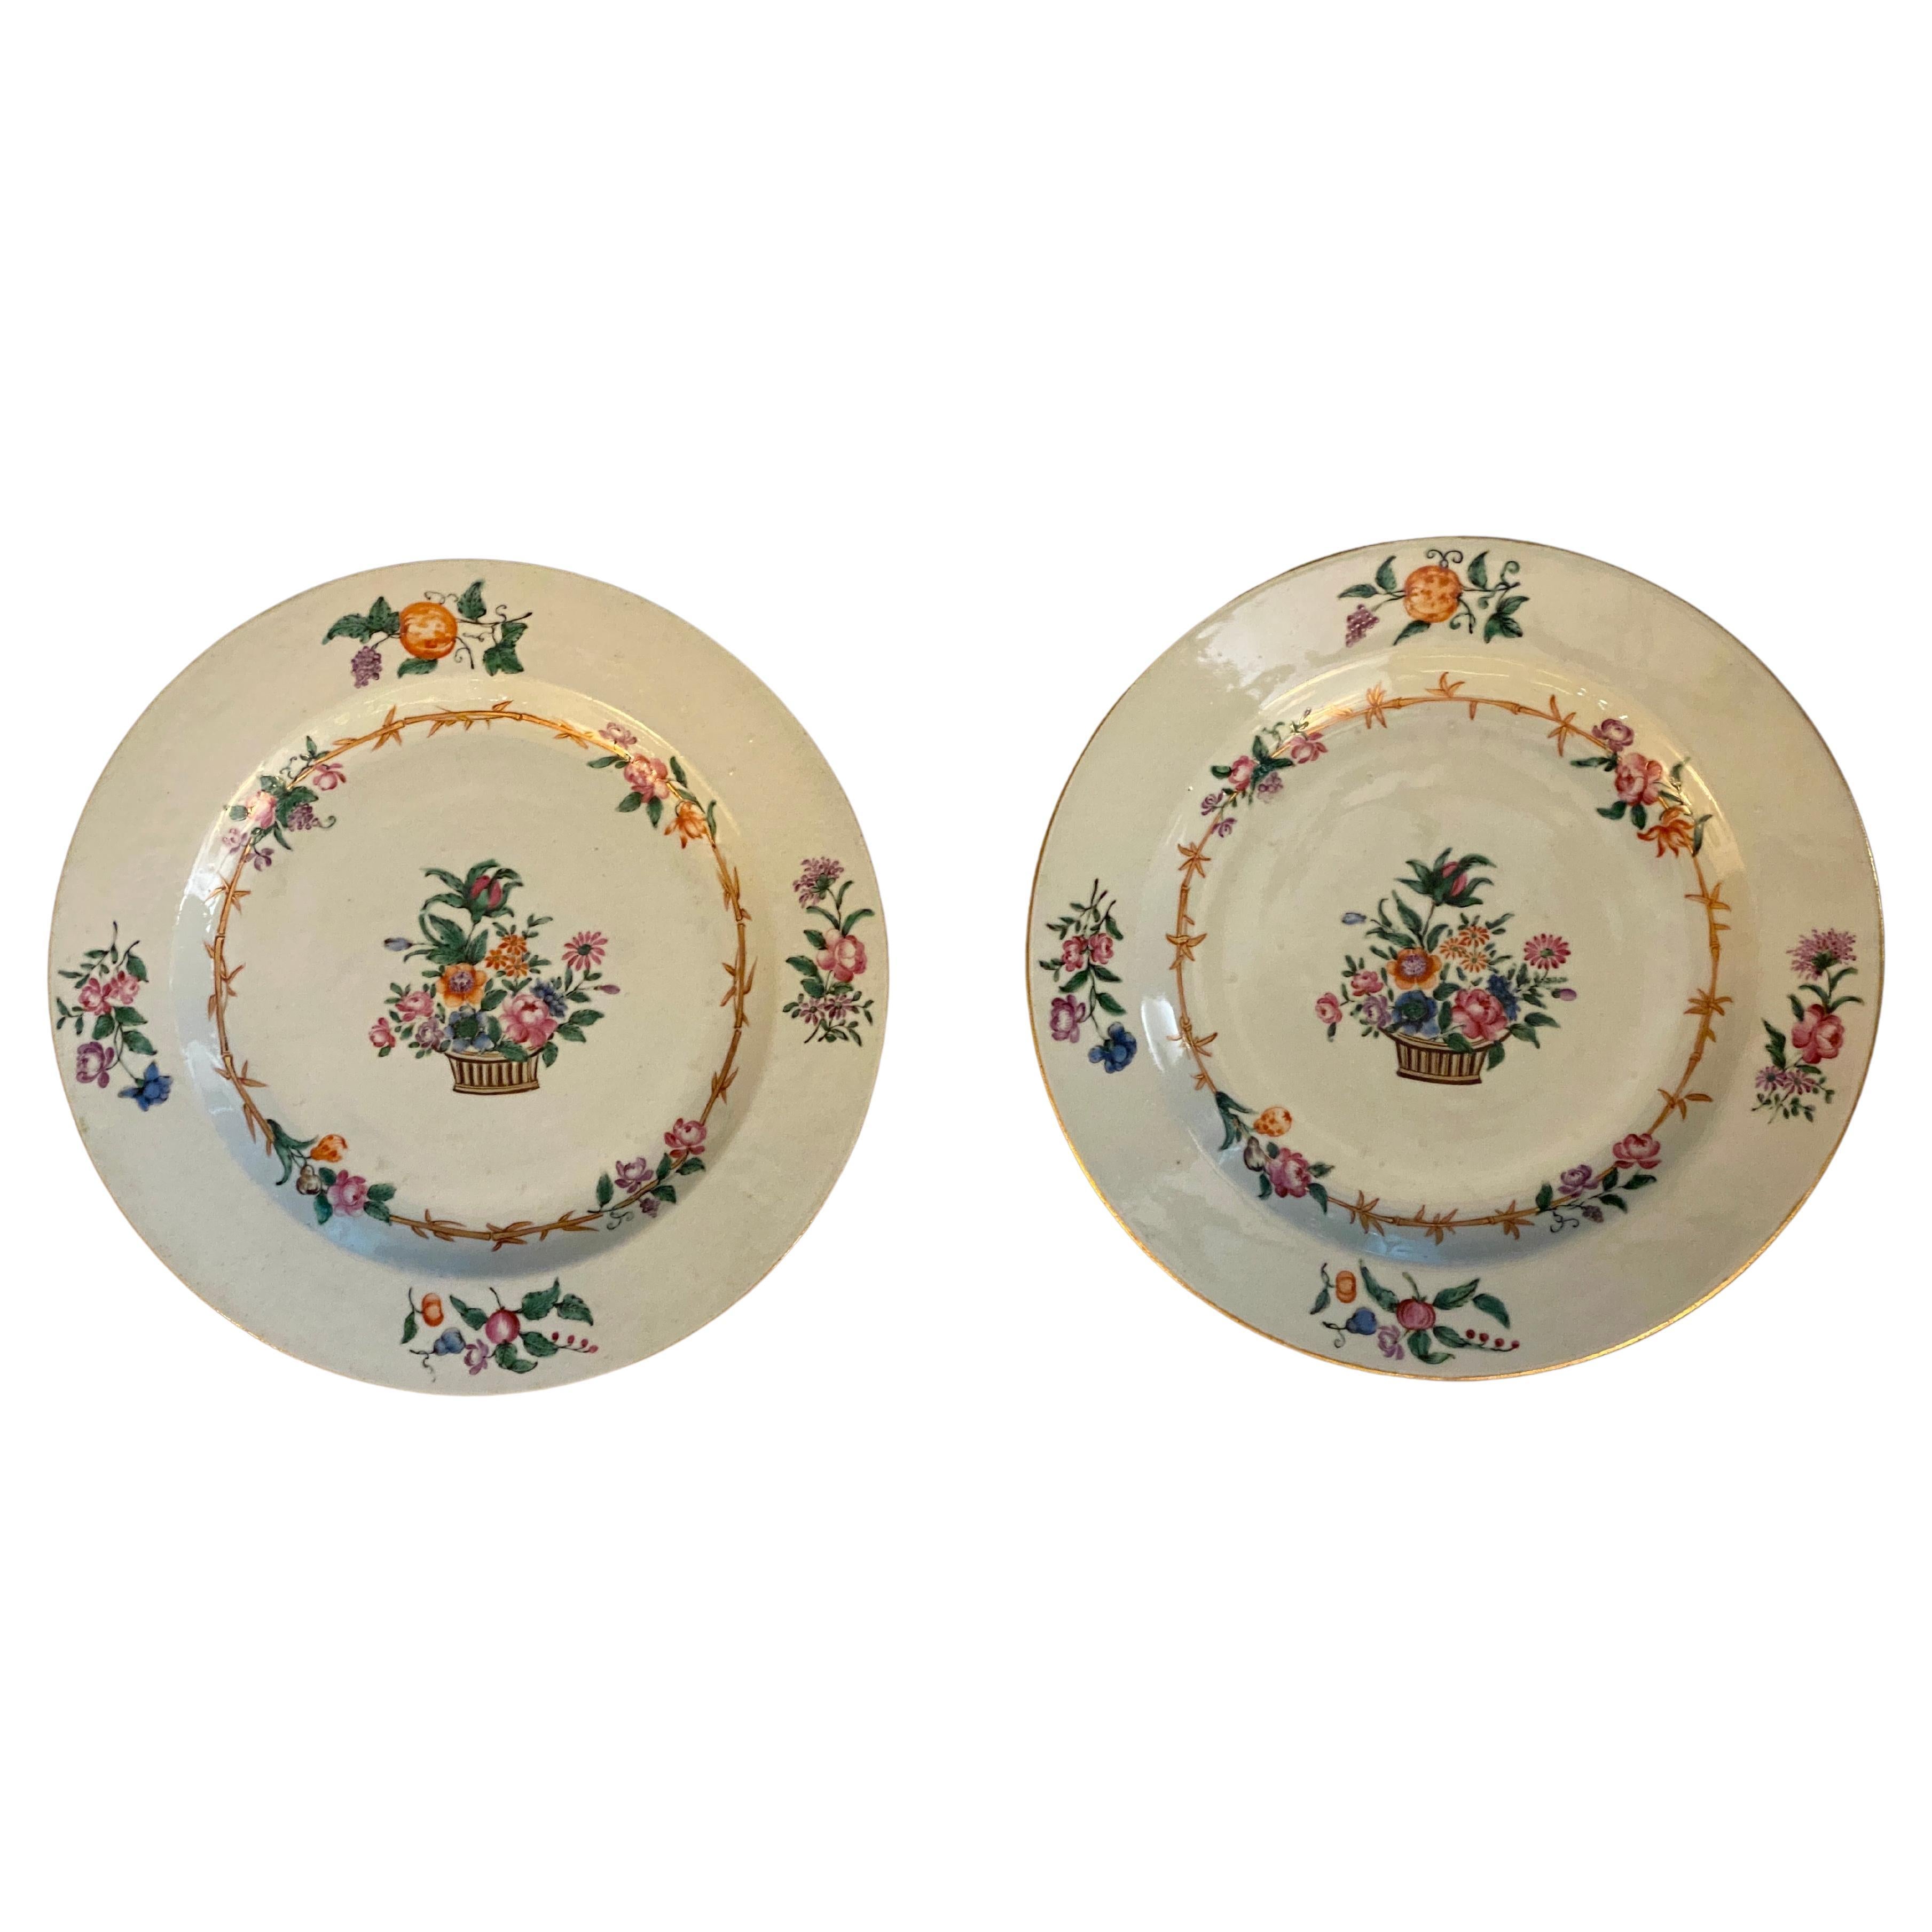 Pair of 18th Century China East India Company Porcelain Plates